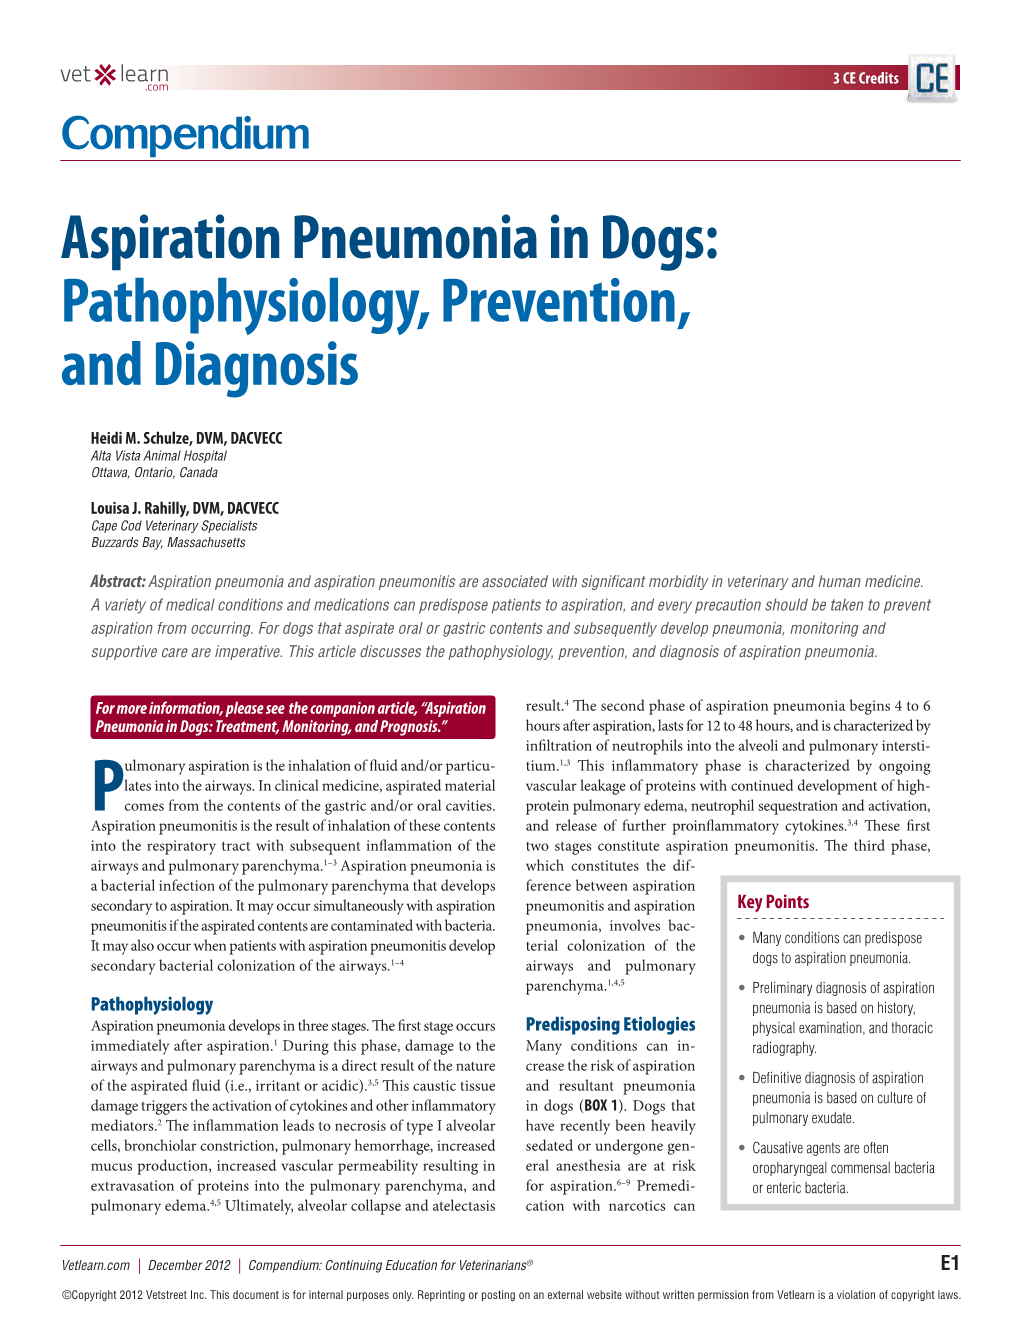 Aspiration Pneumonia in Dogs: Pathophysiology, Prevention, and Diagnosis